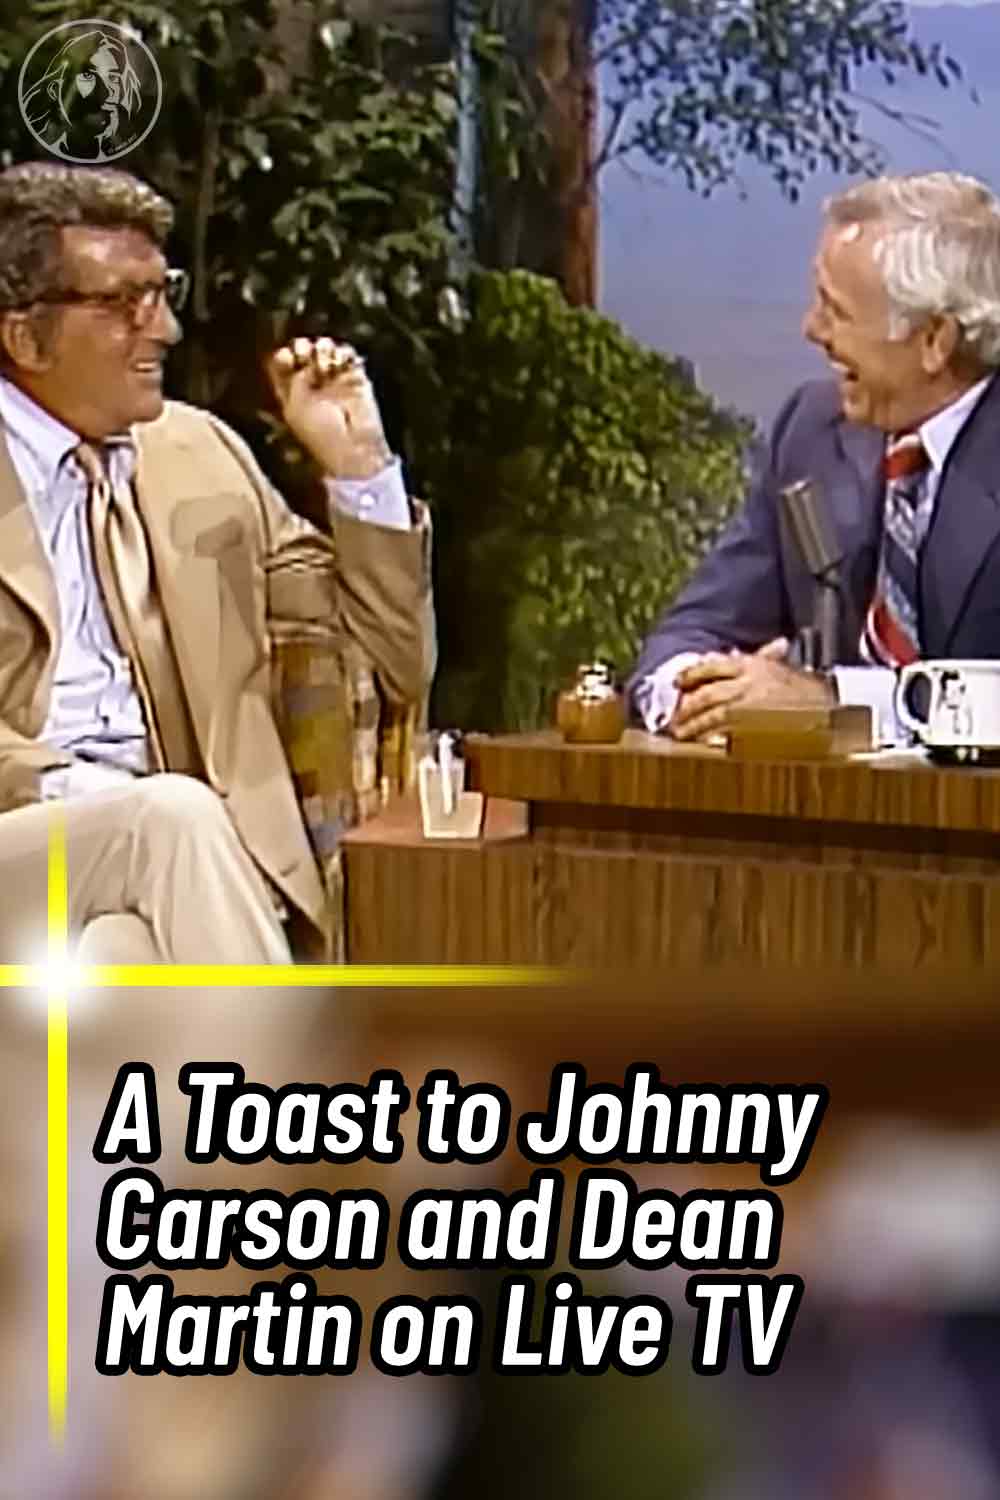 A Toast to Johnny Carson and Dean Martin on Live TV - WWJD